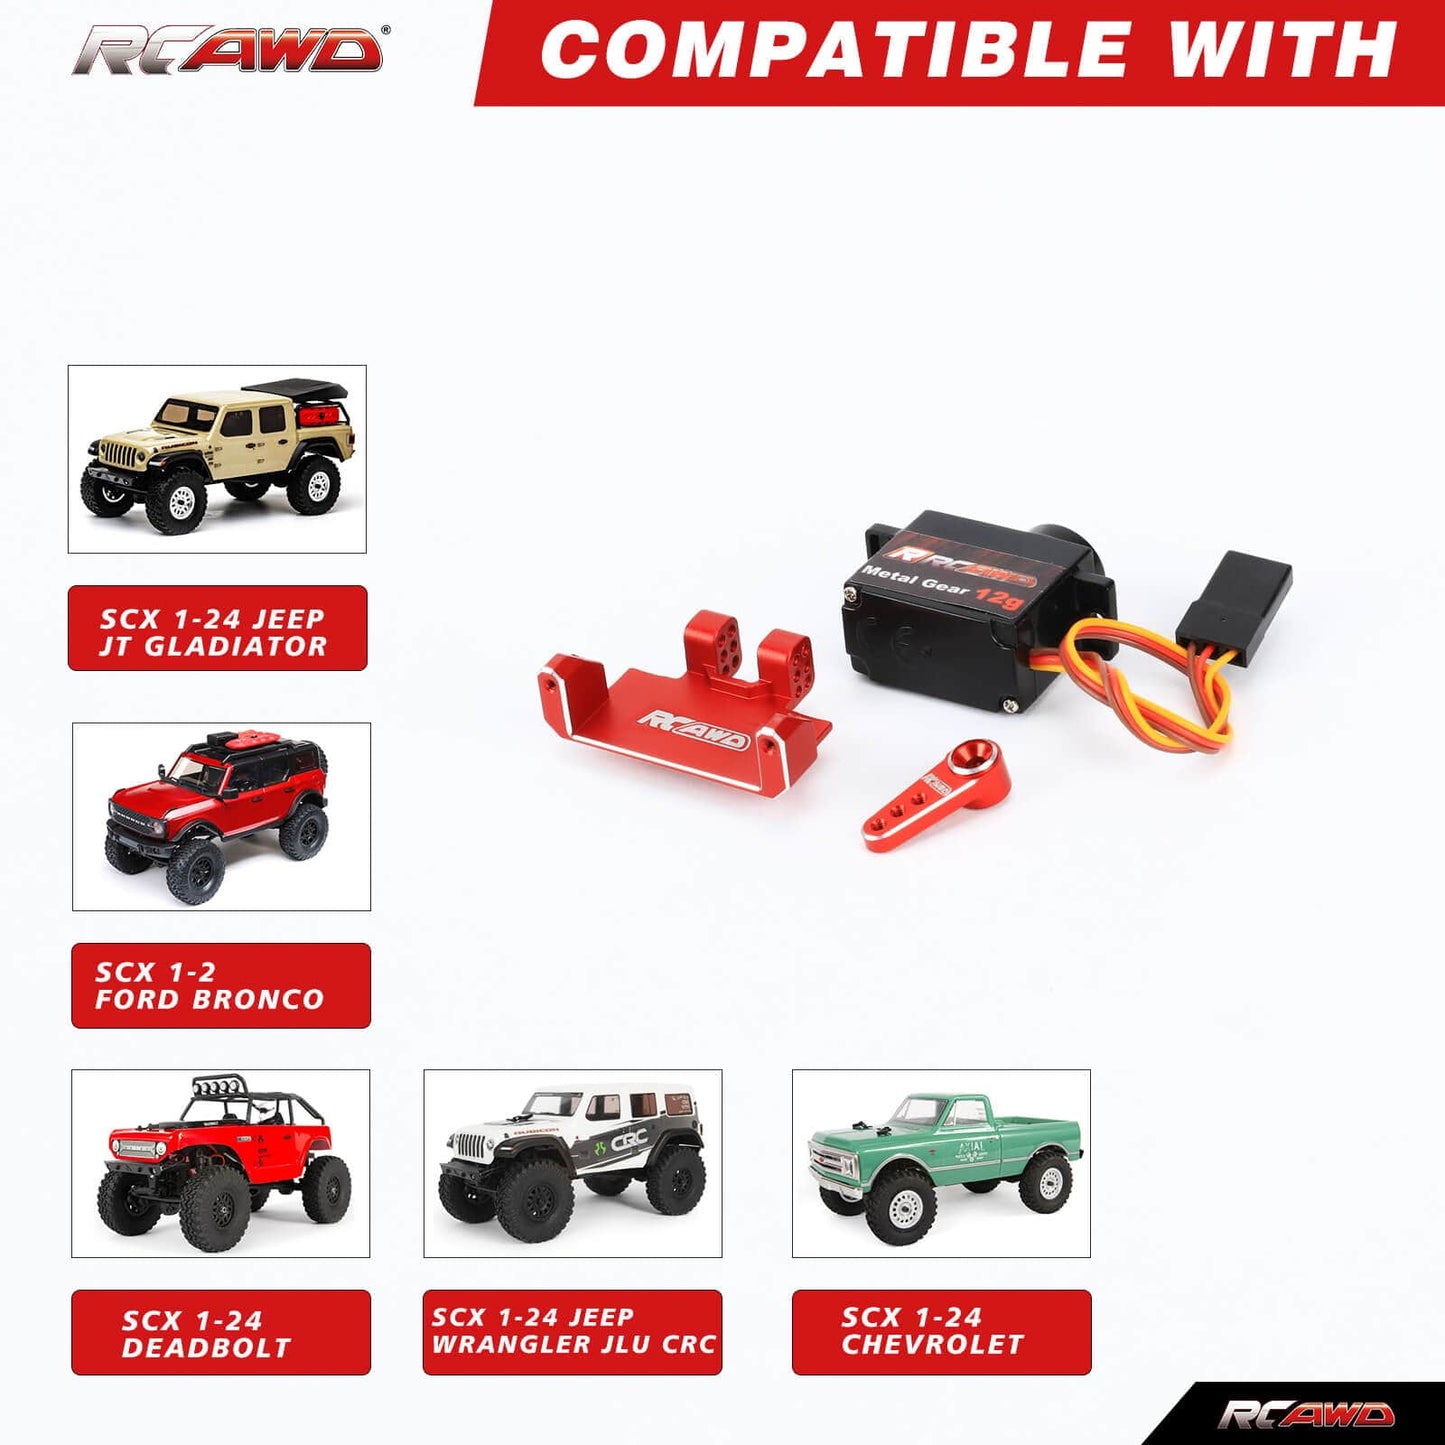 RCAWD AXIAL SCX24 RCAWD Axial SCX24 Upgrades 12g Metal Gear Servos Set with 15T Arm for AX24 Car